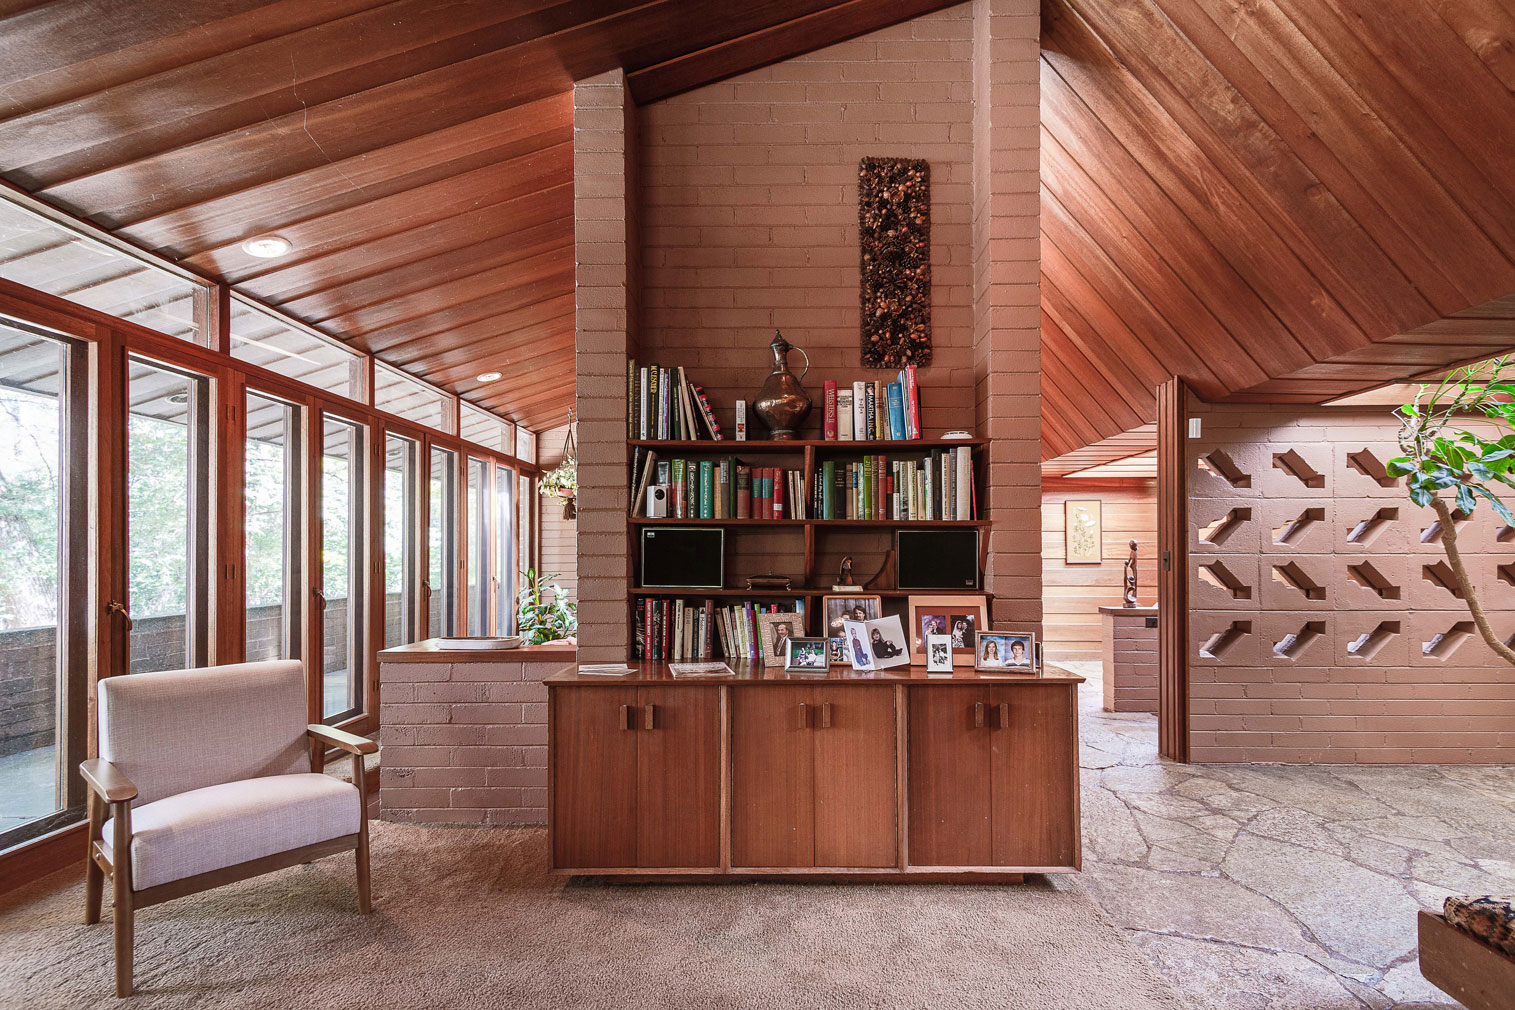 Brick walls have geometric cut outs and support sloping mahogany ceilings